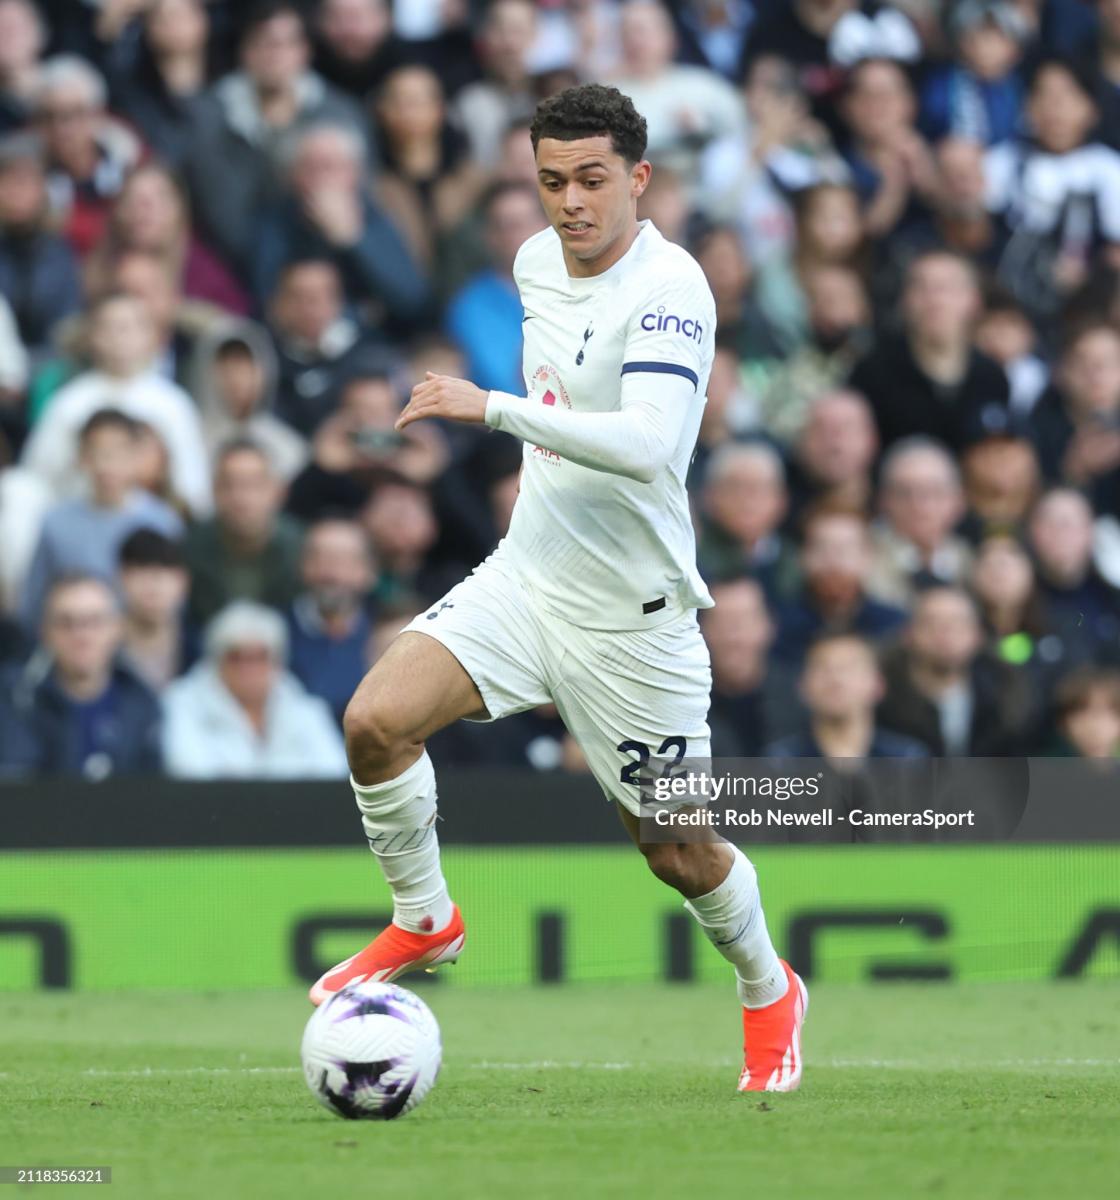 Tottenham Hotspur's Brennan Johnson during the <strong><a  data-cke-saved-href='https://www.vavel.com/en/football/2023/12/31/tottenham-hotspur/1167314-tottenham-hotspur-3-1-bournemouth-spurs-ruin-the-cherries-unbeaten-run.html' href='https://www.vavel.com/en/football/2023/12/31/tottenham-hotspur/1167314-tottenham-hotspur-3-1-bournemouth-spurs-ruin-the-cherries-unbeaten-run.html'>Premier League</a></strong> match between <strong><a  data-cke-saved-href='https://www.vavel.com/en/football/2023/12/04/tottenham-hotspur/1165233-tottenham-vs-newcastle-what-threats-do-the-magpies-pose-to-spurs.html' href='https://www.vavel.com/en/football/2023/12/04/tottenham-hotspur/1165233-tottenham-vs-newcastle-what-threats-do-the-magpies-pose-to-spurs.html'>Tottenham Hotspur</a></strong> and <strong><a  data-cke-saved-href='https://www.vavel.com/en/football/2024/03/30/premier-league/1178006-postecoglou-praises-outstanding-son-heung-min-as-spurs-skipper-reaches-new-milestone.html' href='https://www.vavel.com/en/football/2024/03/30/premier-league/1178006-postecoglou-praises-outstanding-son-heung-min-as-spurs-skipper-reaches-new-milestone.html'>Luton Town</a></strong> at <strong><a  data-cke-saved-href='https://www.vavel.com/en/football/2023/12/04/tottenham-hotspur/1165233-tottenham-vs-newcastle-what-threats-do-the-magpies-pose-to-spurs.html' href='https://www.vavel.com/en/football/2023/12/04/tottenham-hotspur/1165233-tottenham-vs-newcastle-what-threats-do-the-magpies-pose-to-spurs.html'>Tottenham Hotspur</a></strong> Stadium on March 30, 2024 in London, England.(Photo by Rob Newell - CameraSport via Getty Images